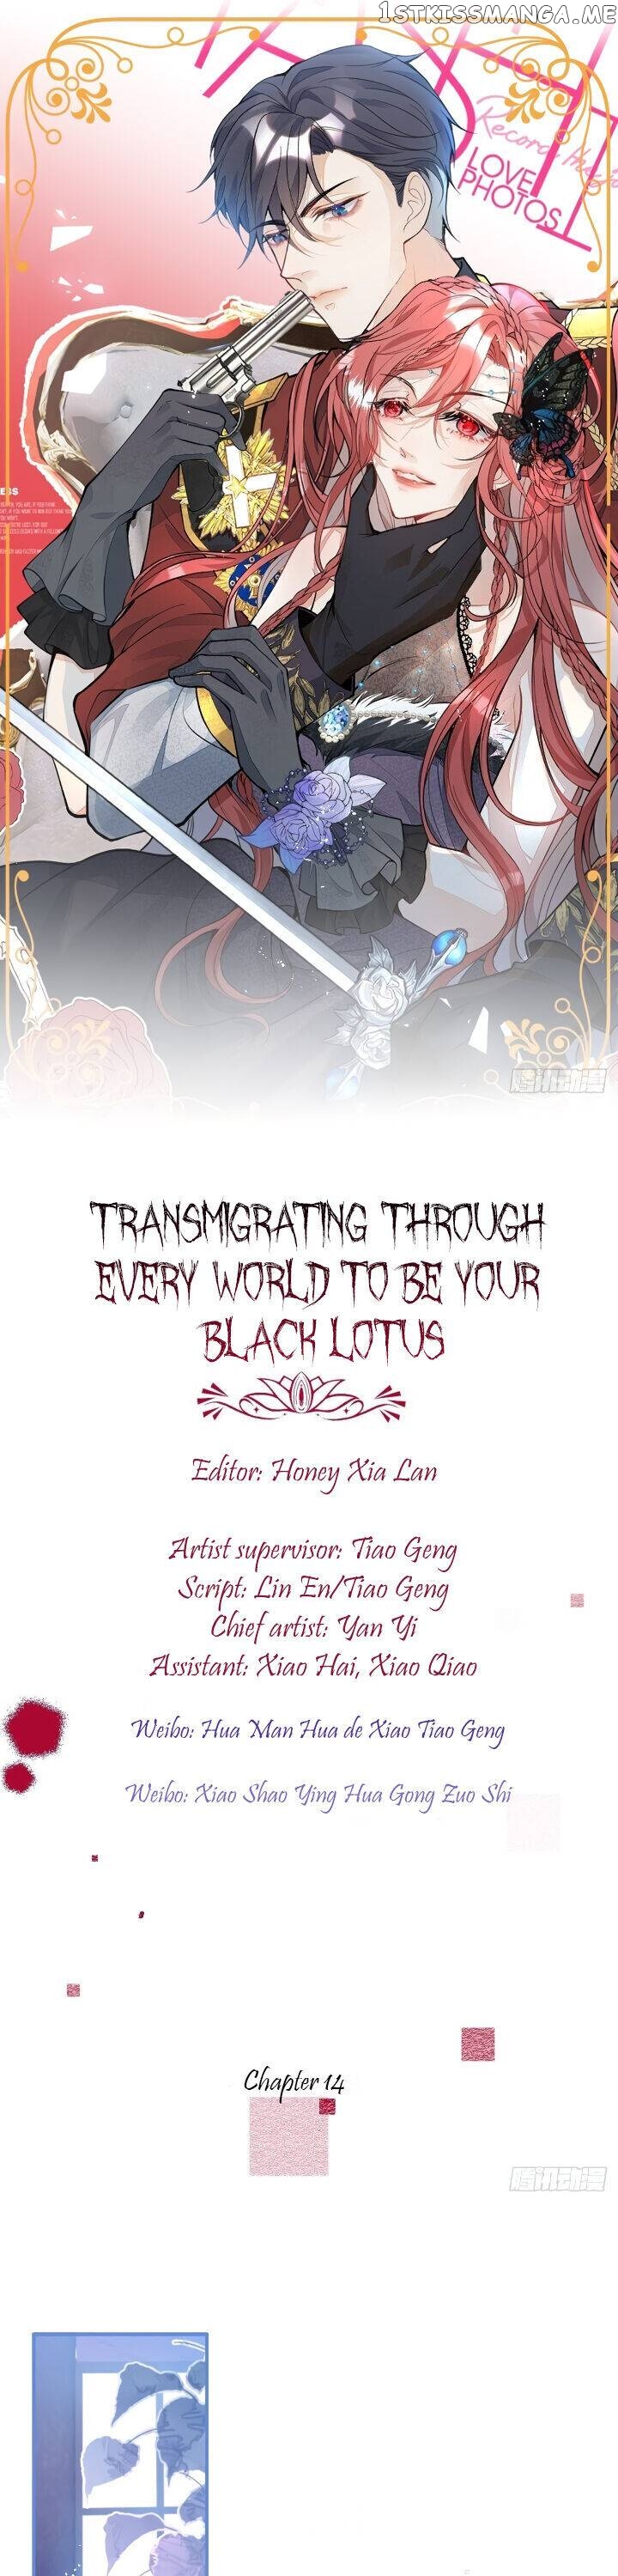 Transmigrating Through Every World To Be Your Black Lotus chapter 14